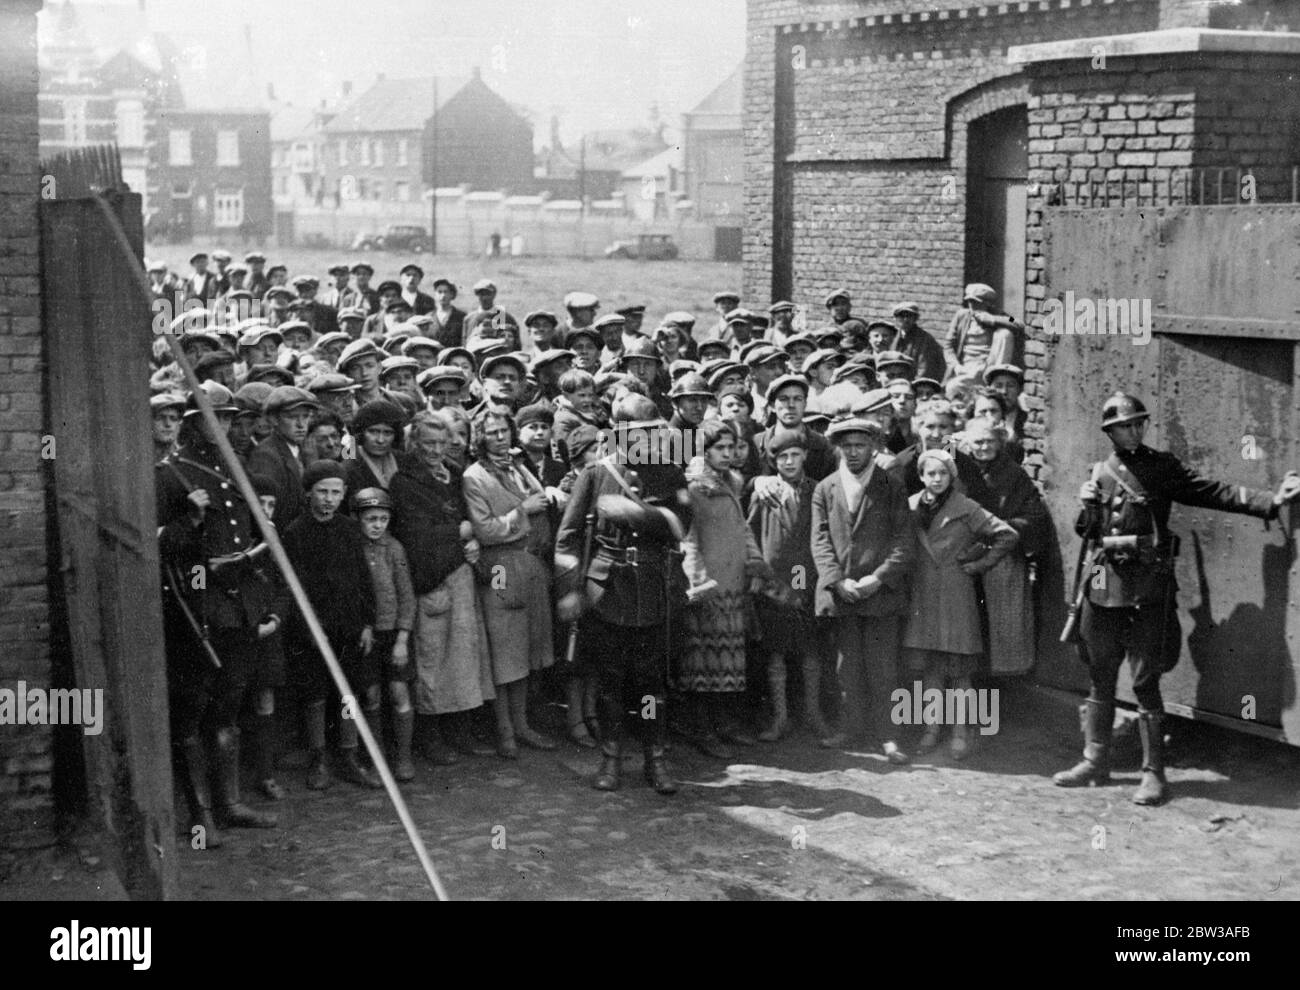 43 perish in Belgian mine disaster . Forty three men entomed when a disastrous explosion occured in a coal mine near Paturages , Belgium . The explosion occured in a gallery 2 , 700 feet underground . After the accident the mine was sealed . Photo shows armed police holding back the crowd of anxious relatives waiting for news at the gates . 17 May 1934 . Stock Photo